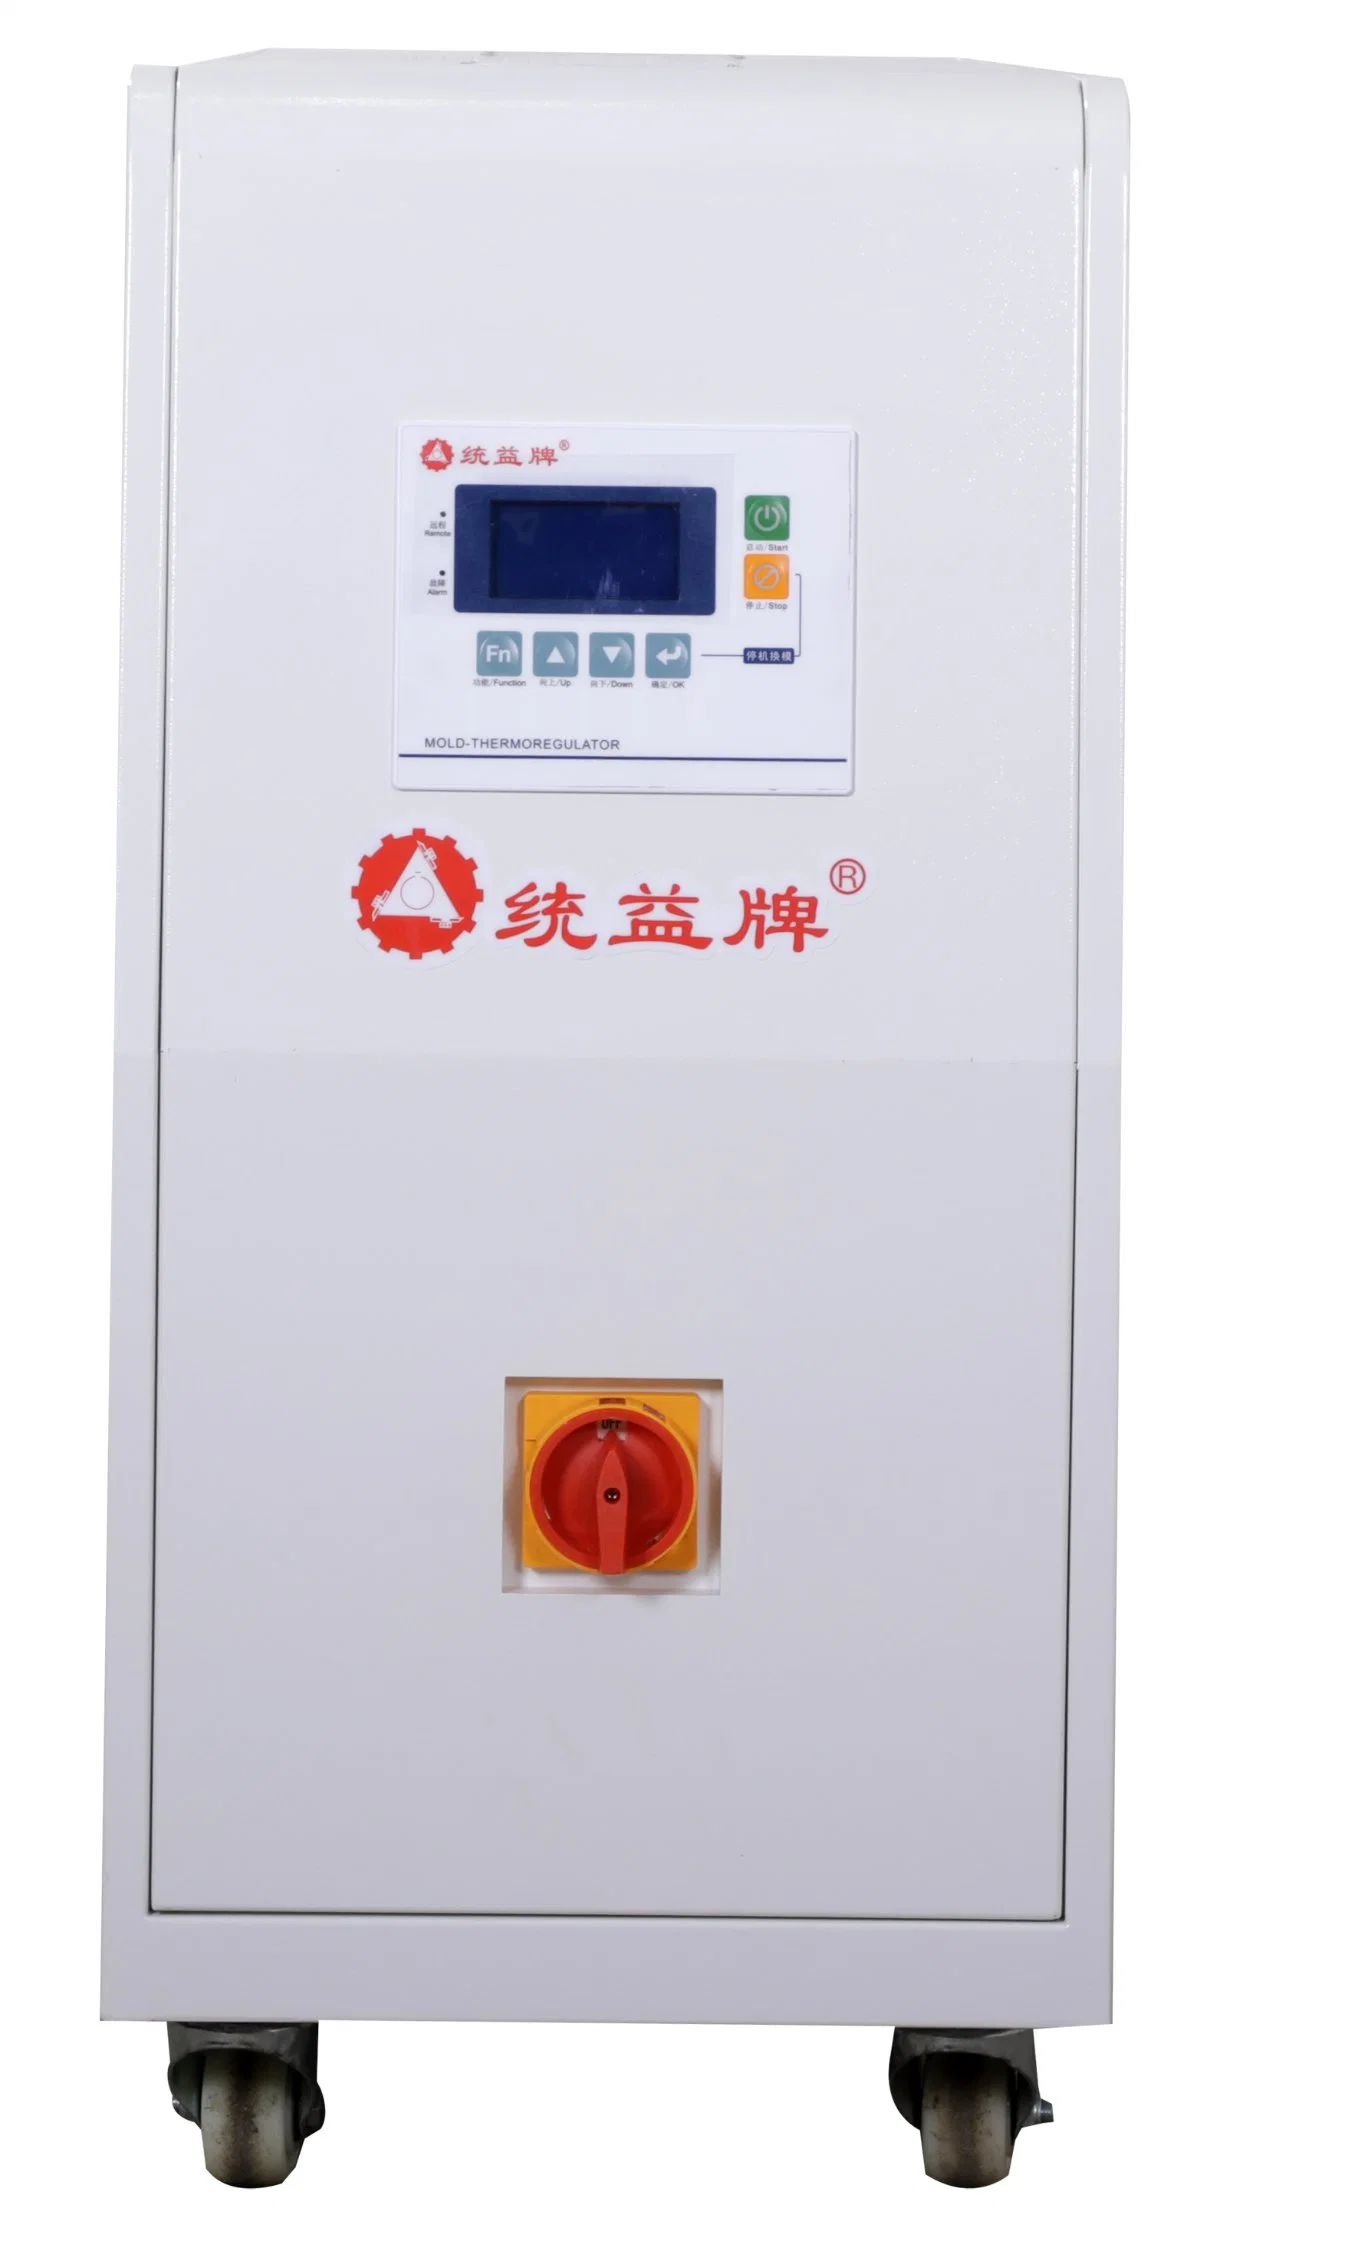 Water Type Mold Temperature Controller for Injection Molding Machine